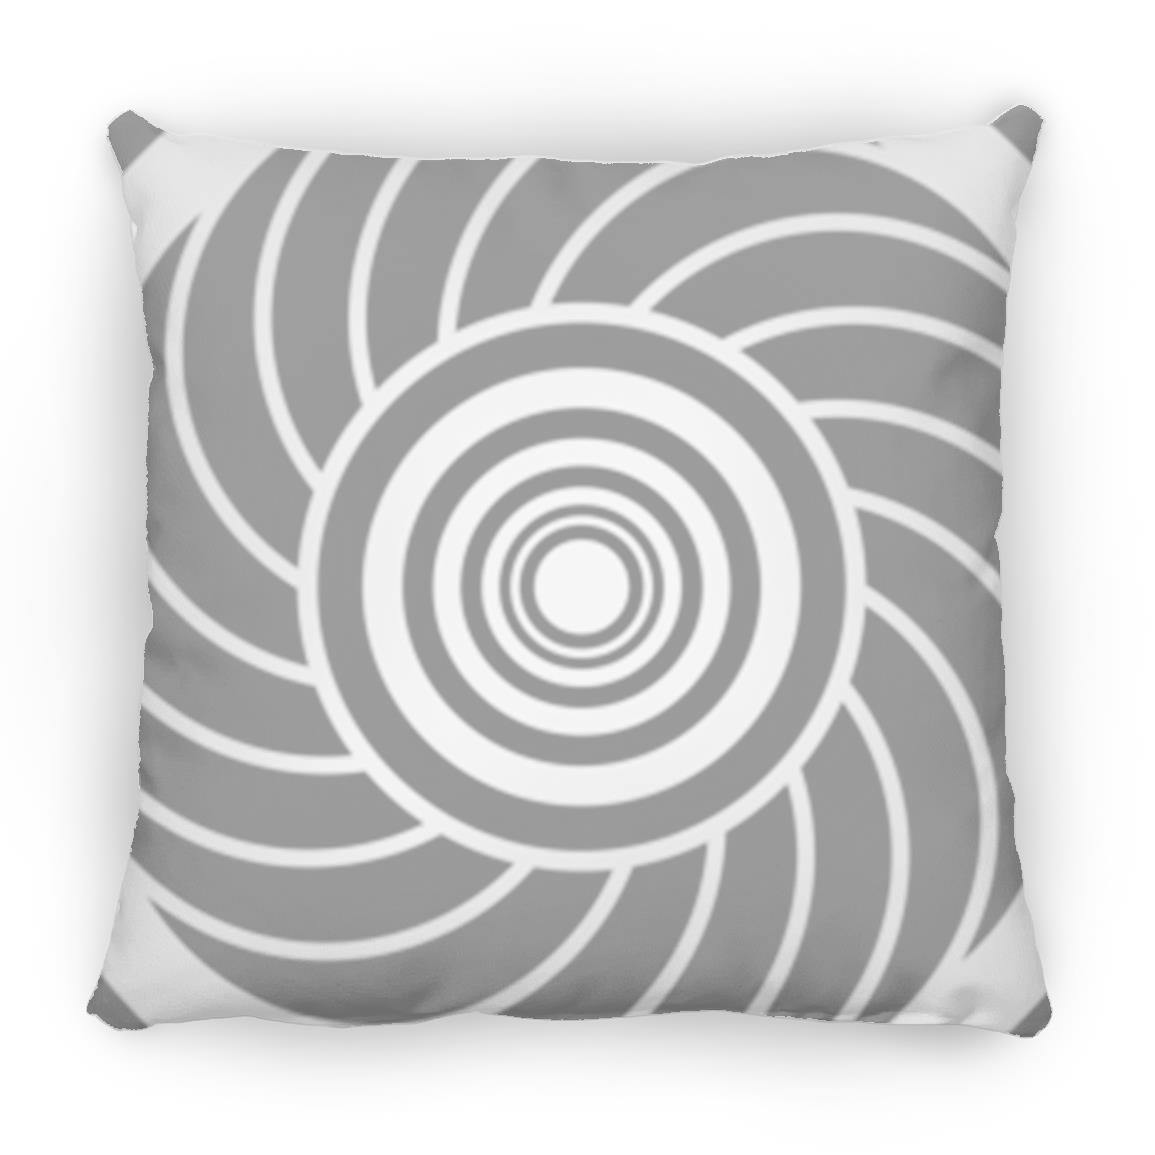 Crop Circle Pillow - Roundway Hill - Shapes of Wisdom